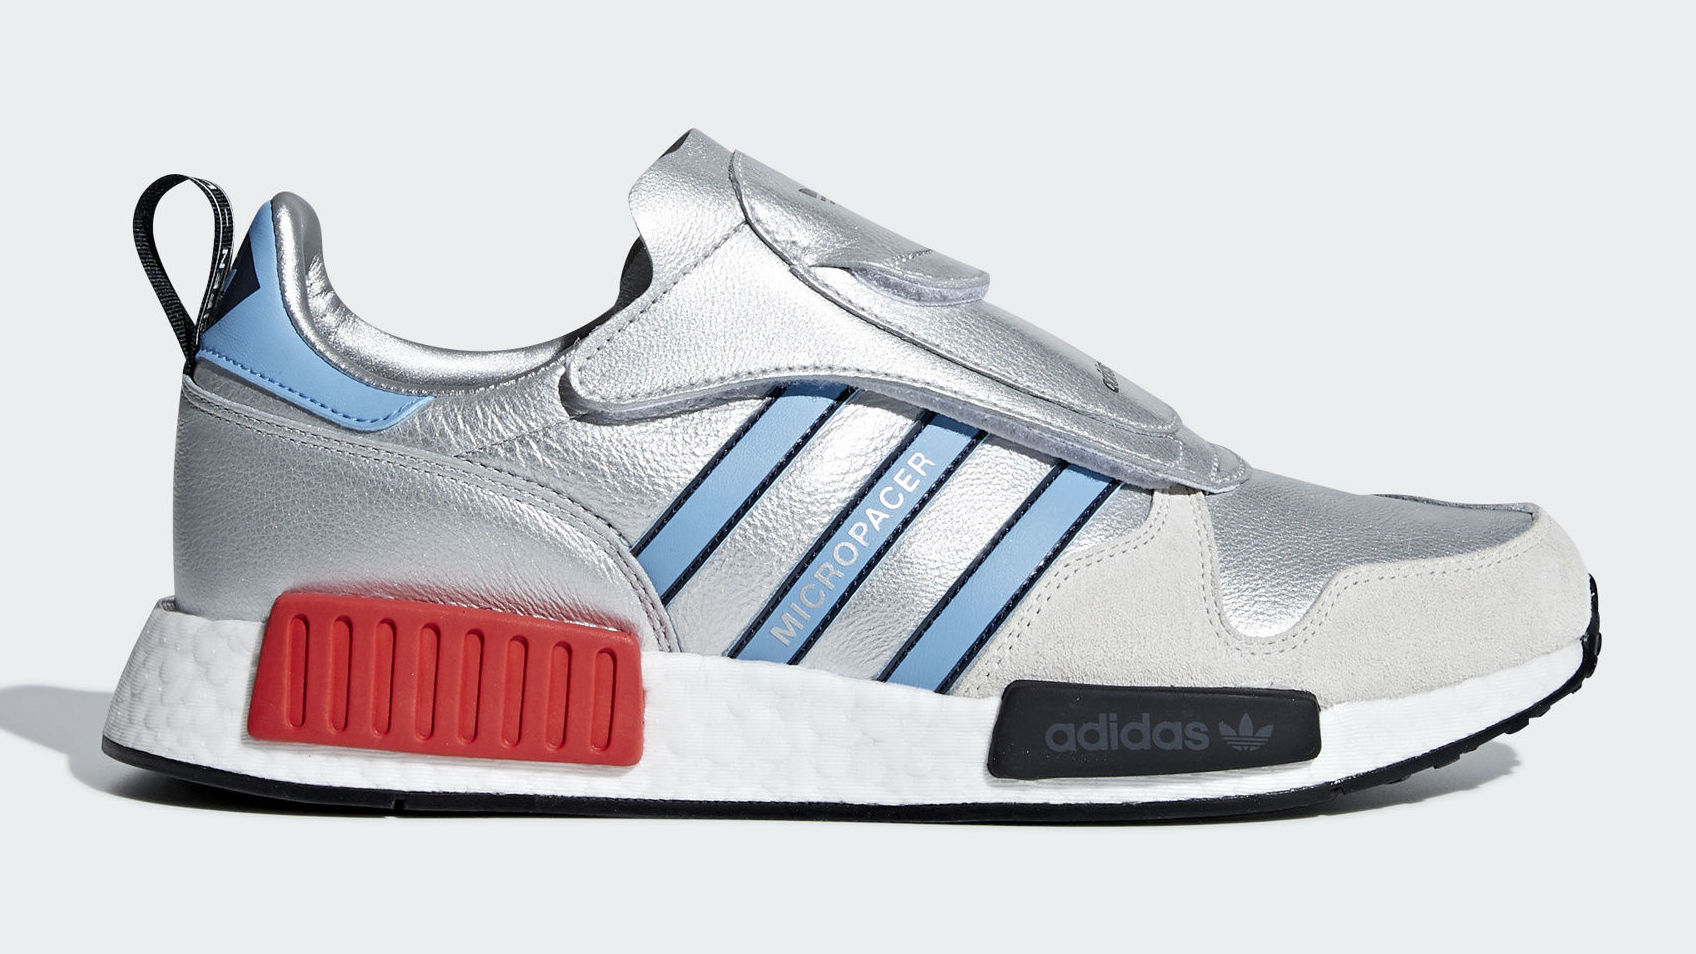 Adidas Originals Gave the Micropacer an NMD Sole | Complex